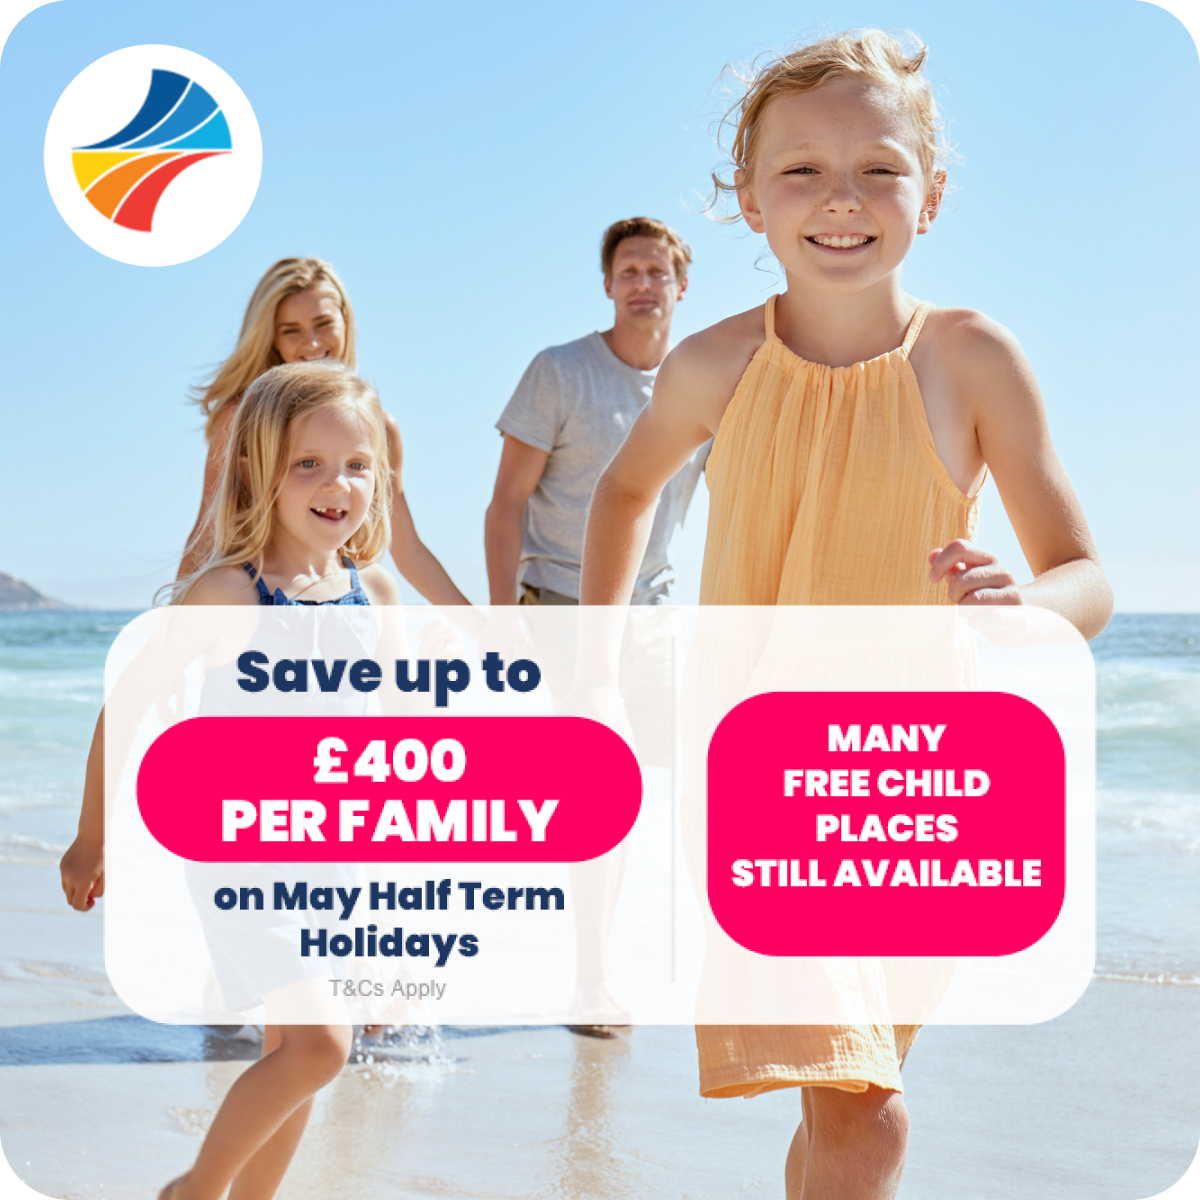 🔥You can save up to £400 off our May half term holidays to sunny Bulgaria. We are offering extra savings of up to £300 plus you can save an extra £100 per booking in our Easter Sale - but hurry, the sale ends 2 April, so get 'cracking' and book today! 🐣 bit.ly/3VvAqGr